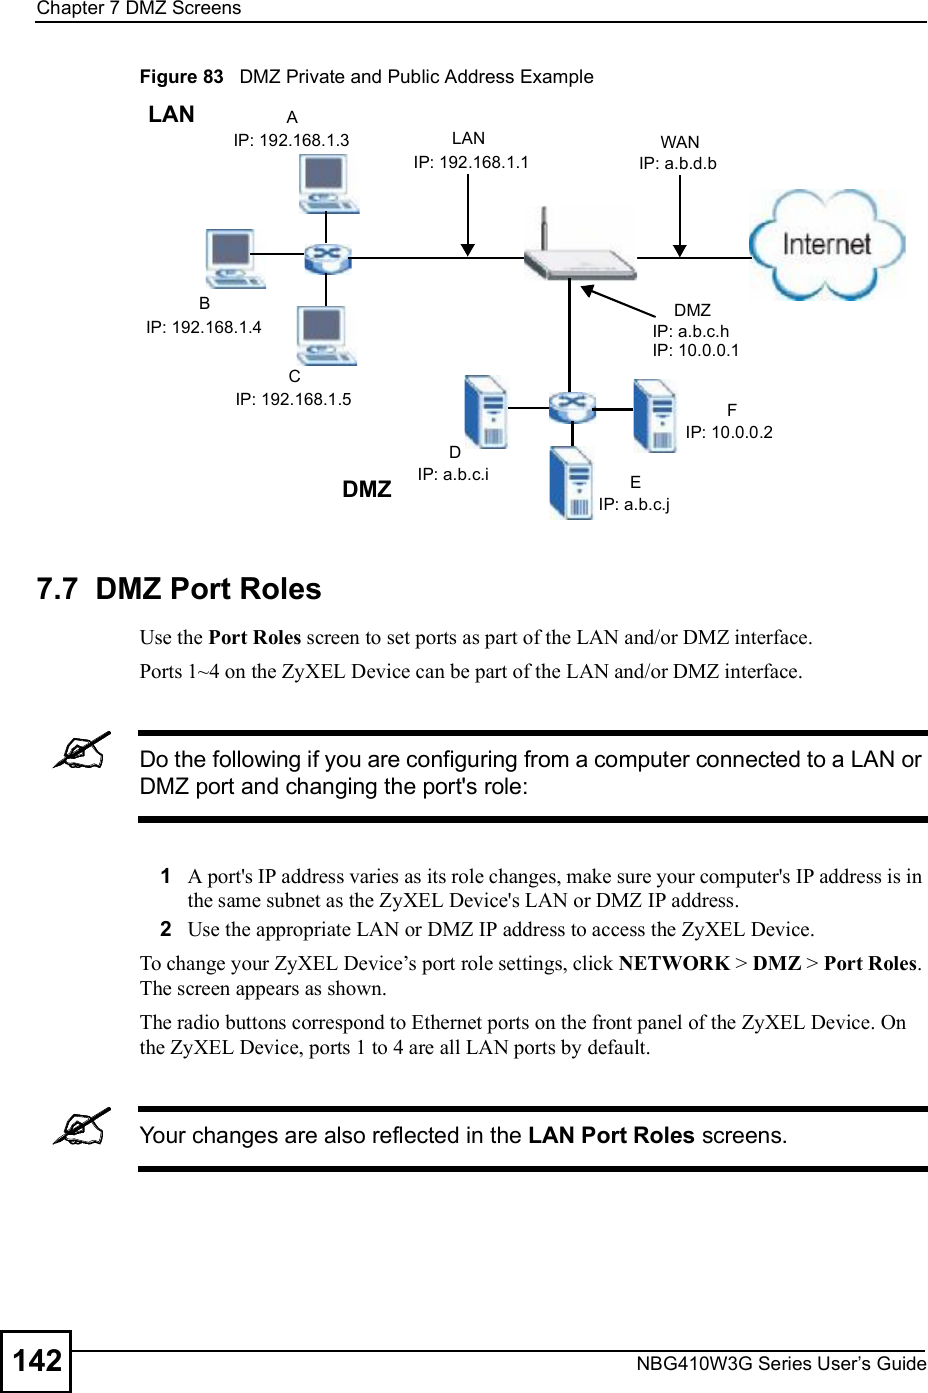 Chapter 7DMZ ScreensNBG410W3G Series User s Guide142Figure 83   DMZ Private and Public Address Example7.7  DMZ Port Roles  Use the Port Roles screen to set ports as part of the LAN and/or DMZ interface. Ports 1~4 on the ZyXEL Device can be part of the LAN and/or DMZ interface. Do the following if you are configuring from a computer connected to a LAN or DMZ port and changing the port&apos;s role:1A port&apos;s IP address varies as its role changes, make sure your computer&apos;s IP address is in the same subnet as the ZyXEL Device&apos;s LAN or DMZ IP address.2Use the appropriate LAN or DMZ IP address to access the ZyXEL Device.To change your ZyXEL Device!s port role settings, click NETWORK &gt; DMZ &gt; Port Roles. The screen appears as shown.The radio buttons correspond to Ethernet ports on the front panel of the ZyXEL Device. On the ZyXEL Device, ports 1 to 4 are all LAN ports by default. Your changes are also reflected in the LAN Port Roles screens.AIP: 192.168.1.3BIP: 192.168.1.4CIP: 192.168.1.5LANLANIP: 192.168.1.1DIP: a.b.c.i EIP: a.b.c.jFIP: 10.0.0.2DMZDMZIP: a.b.c.hWANIP: a.b.d.bIP: 10.0.0.1